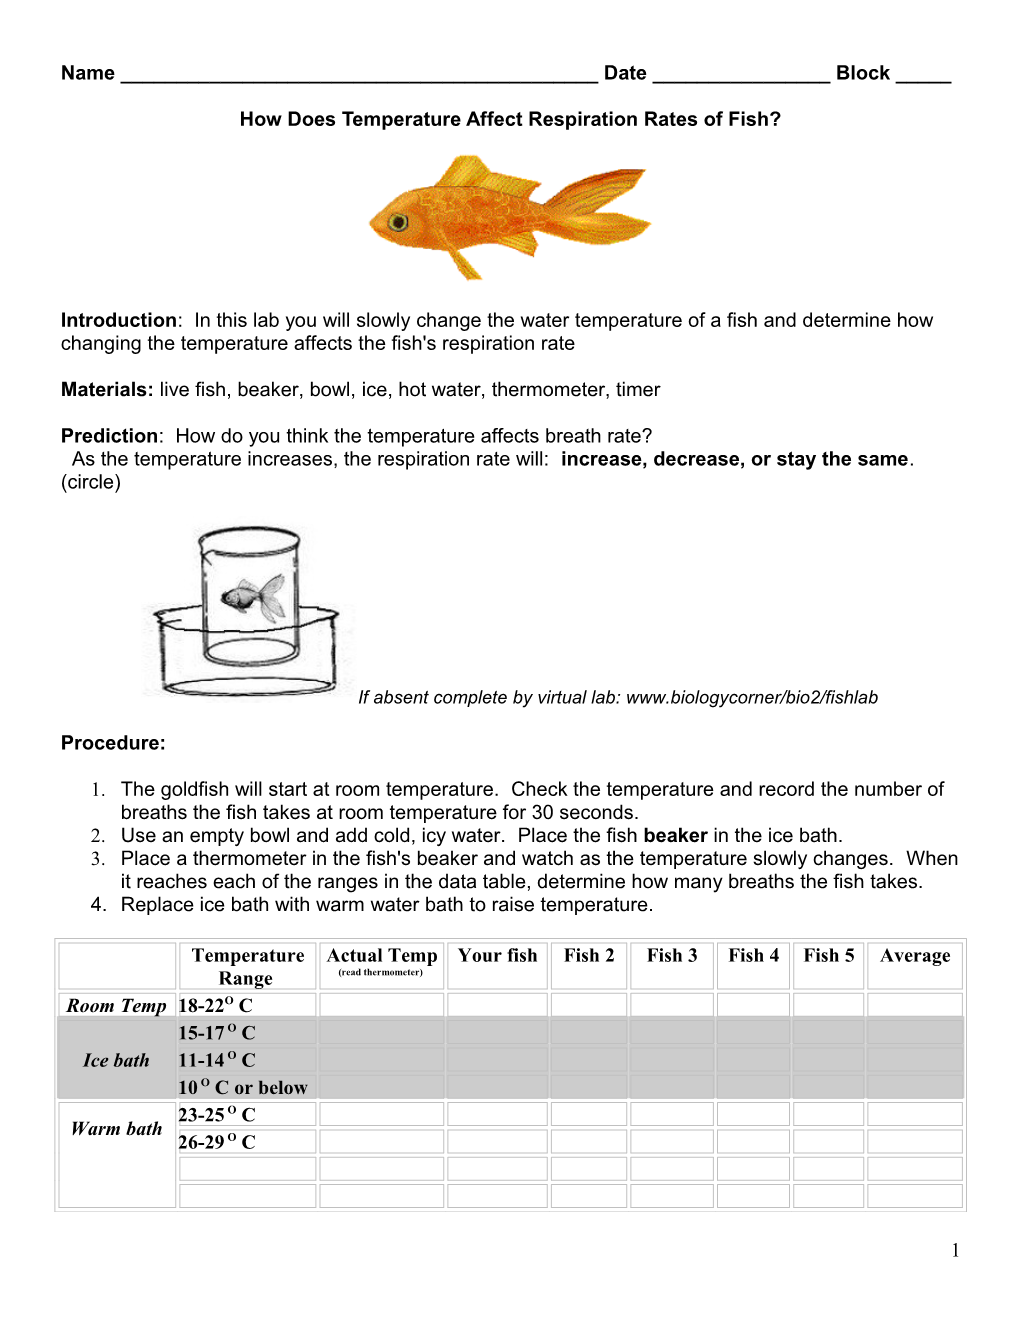 How Does Temperature Affect Respiration Rates of Fish?